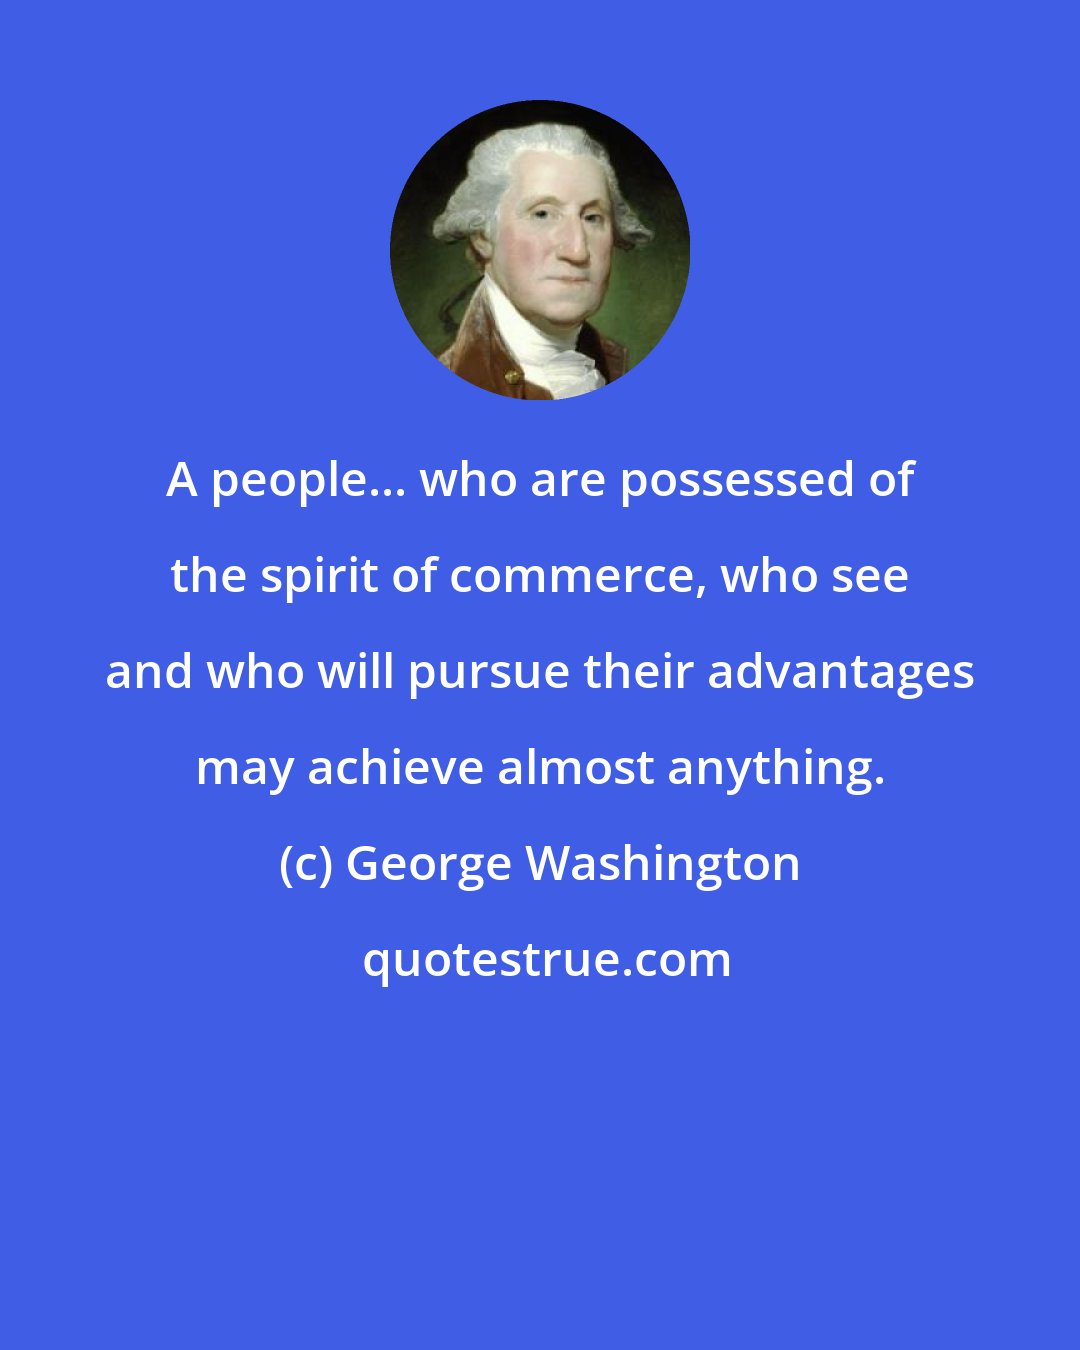 George Washington: A people... who are possessed of the spirit of commerce, who see and who will pursue their advantages may achieve almost anything.